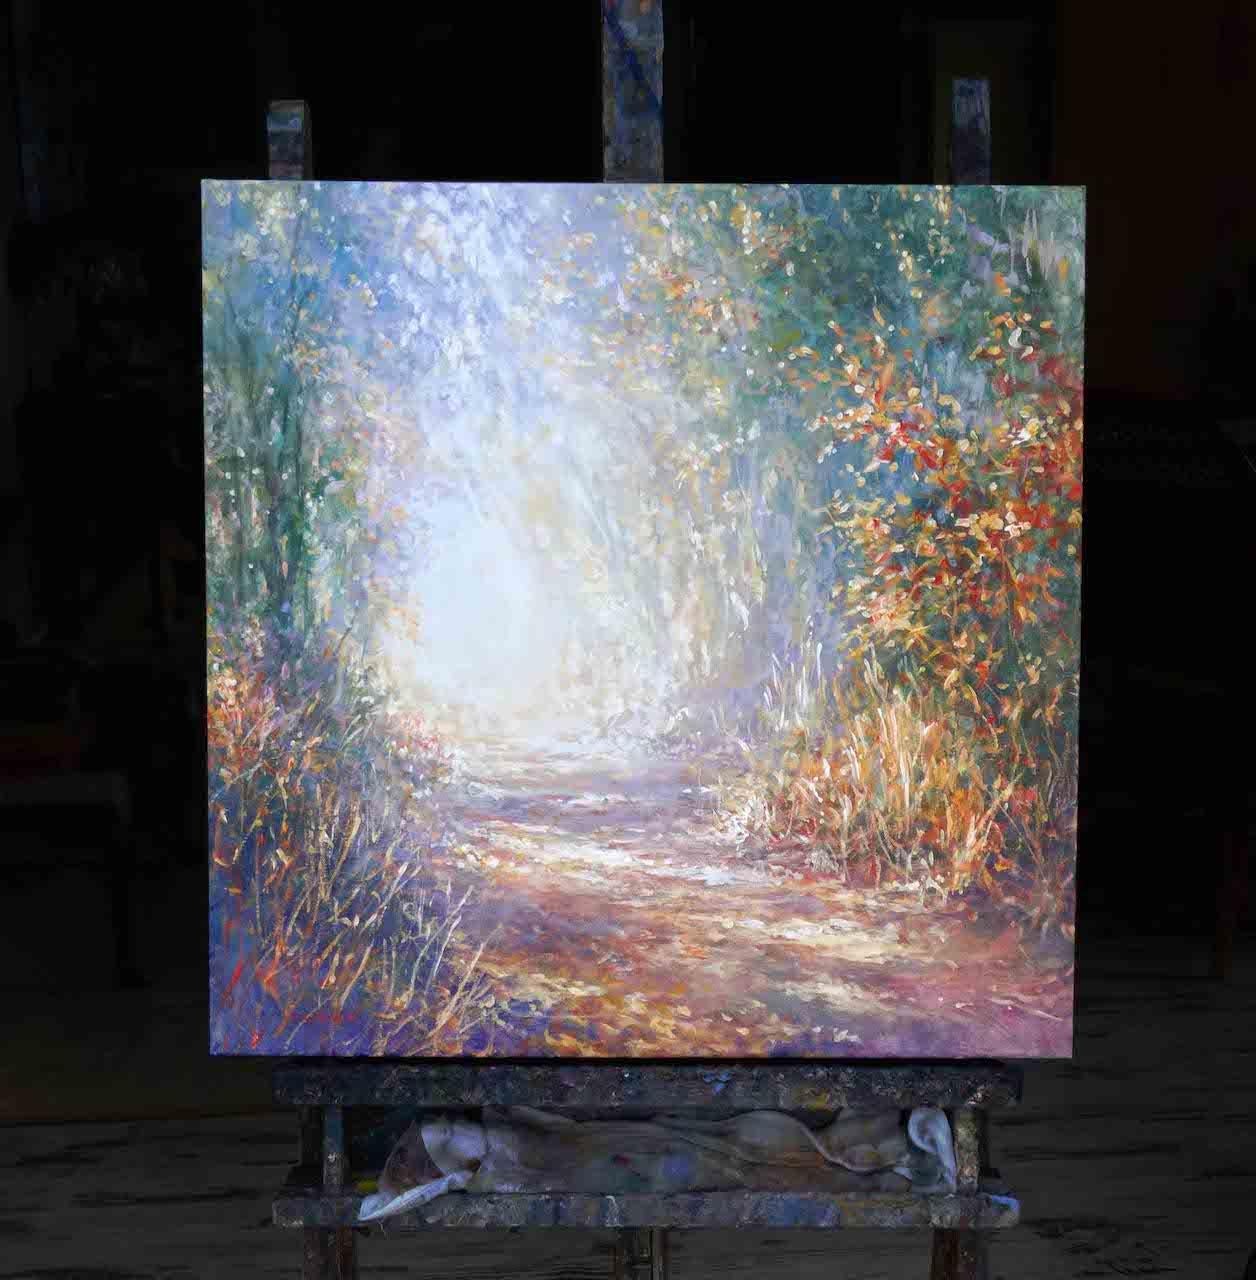 Mariusz Kaldowski
Secret Lane
Impressionist Landscape Painting
Acrylic Paint on Canvas
Canvas Size: H 60cm x W 61cm x D 2cm
Sold Unframed
Ready to Hang
Please note that in situ images are purely an indication of how a piece may look.

Secret Lane is